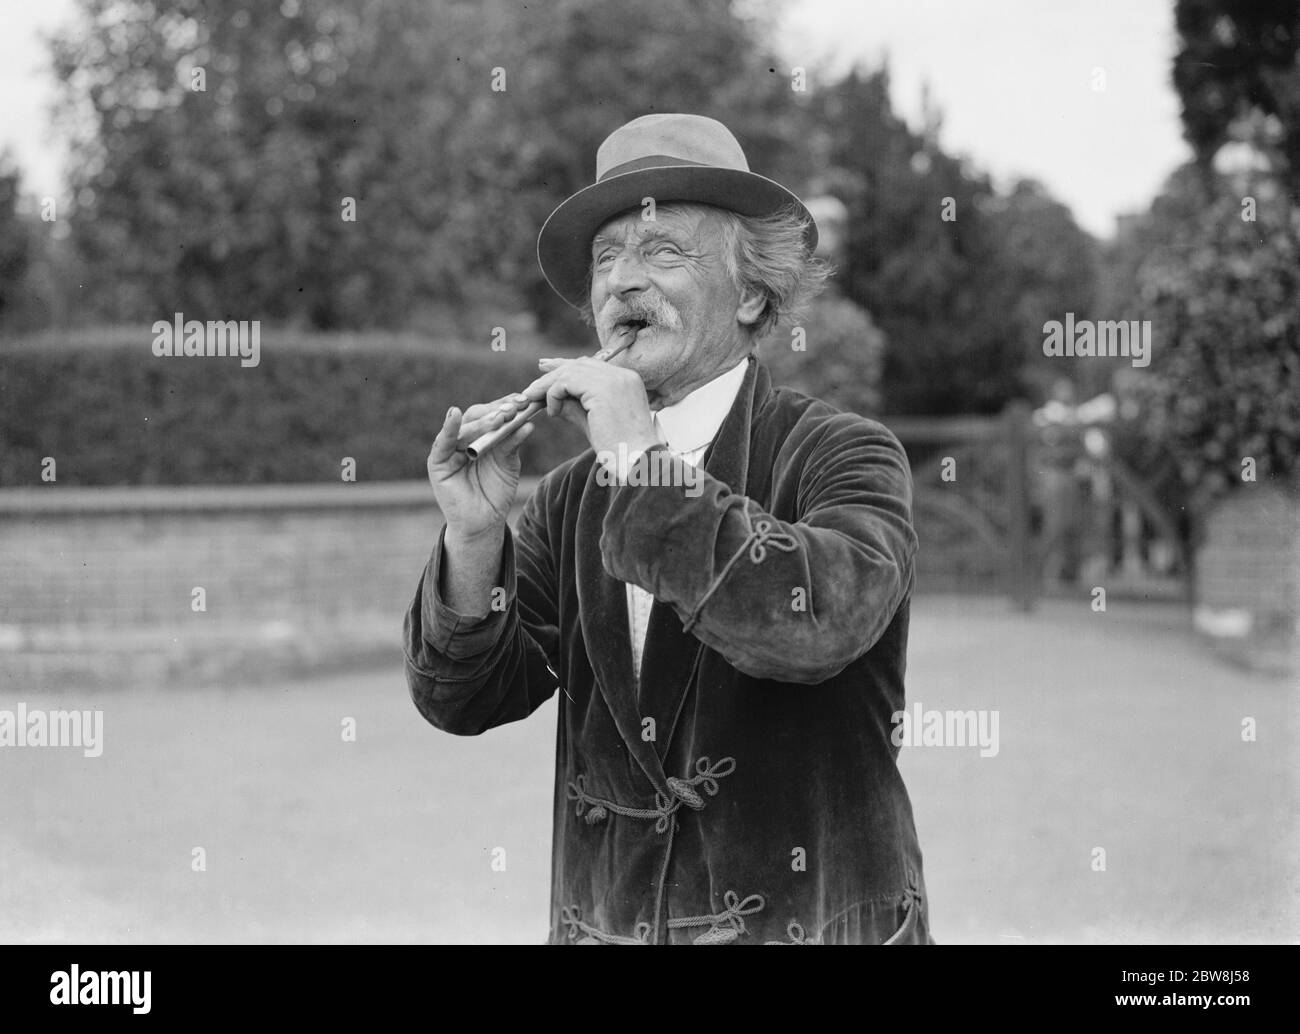 Albert Fisher, known as Whistling Rufus, would play his whistle in the Broadway. He died in 1942, aged 78 . 1937 Stock Photo